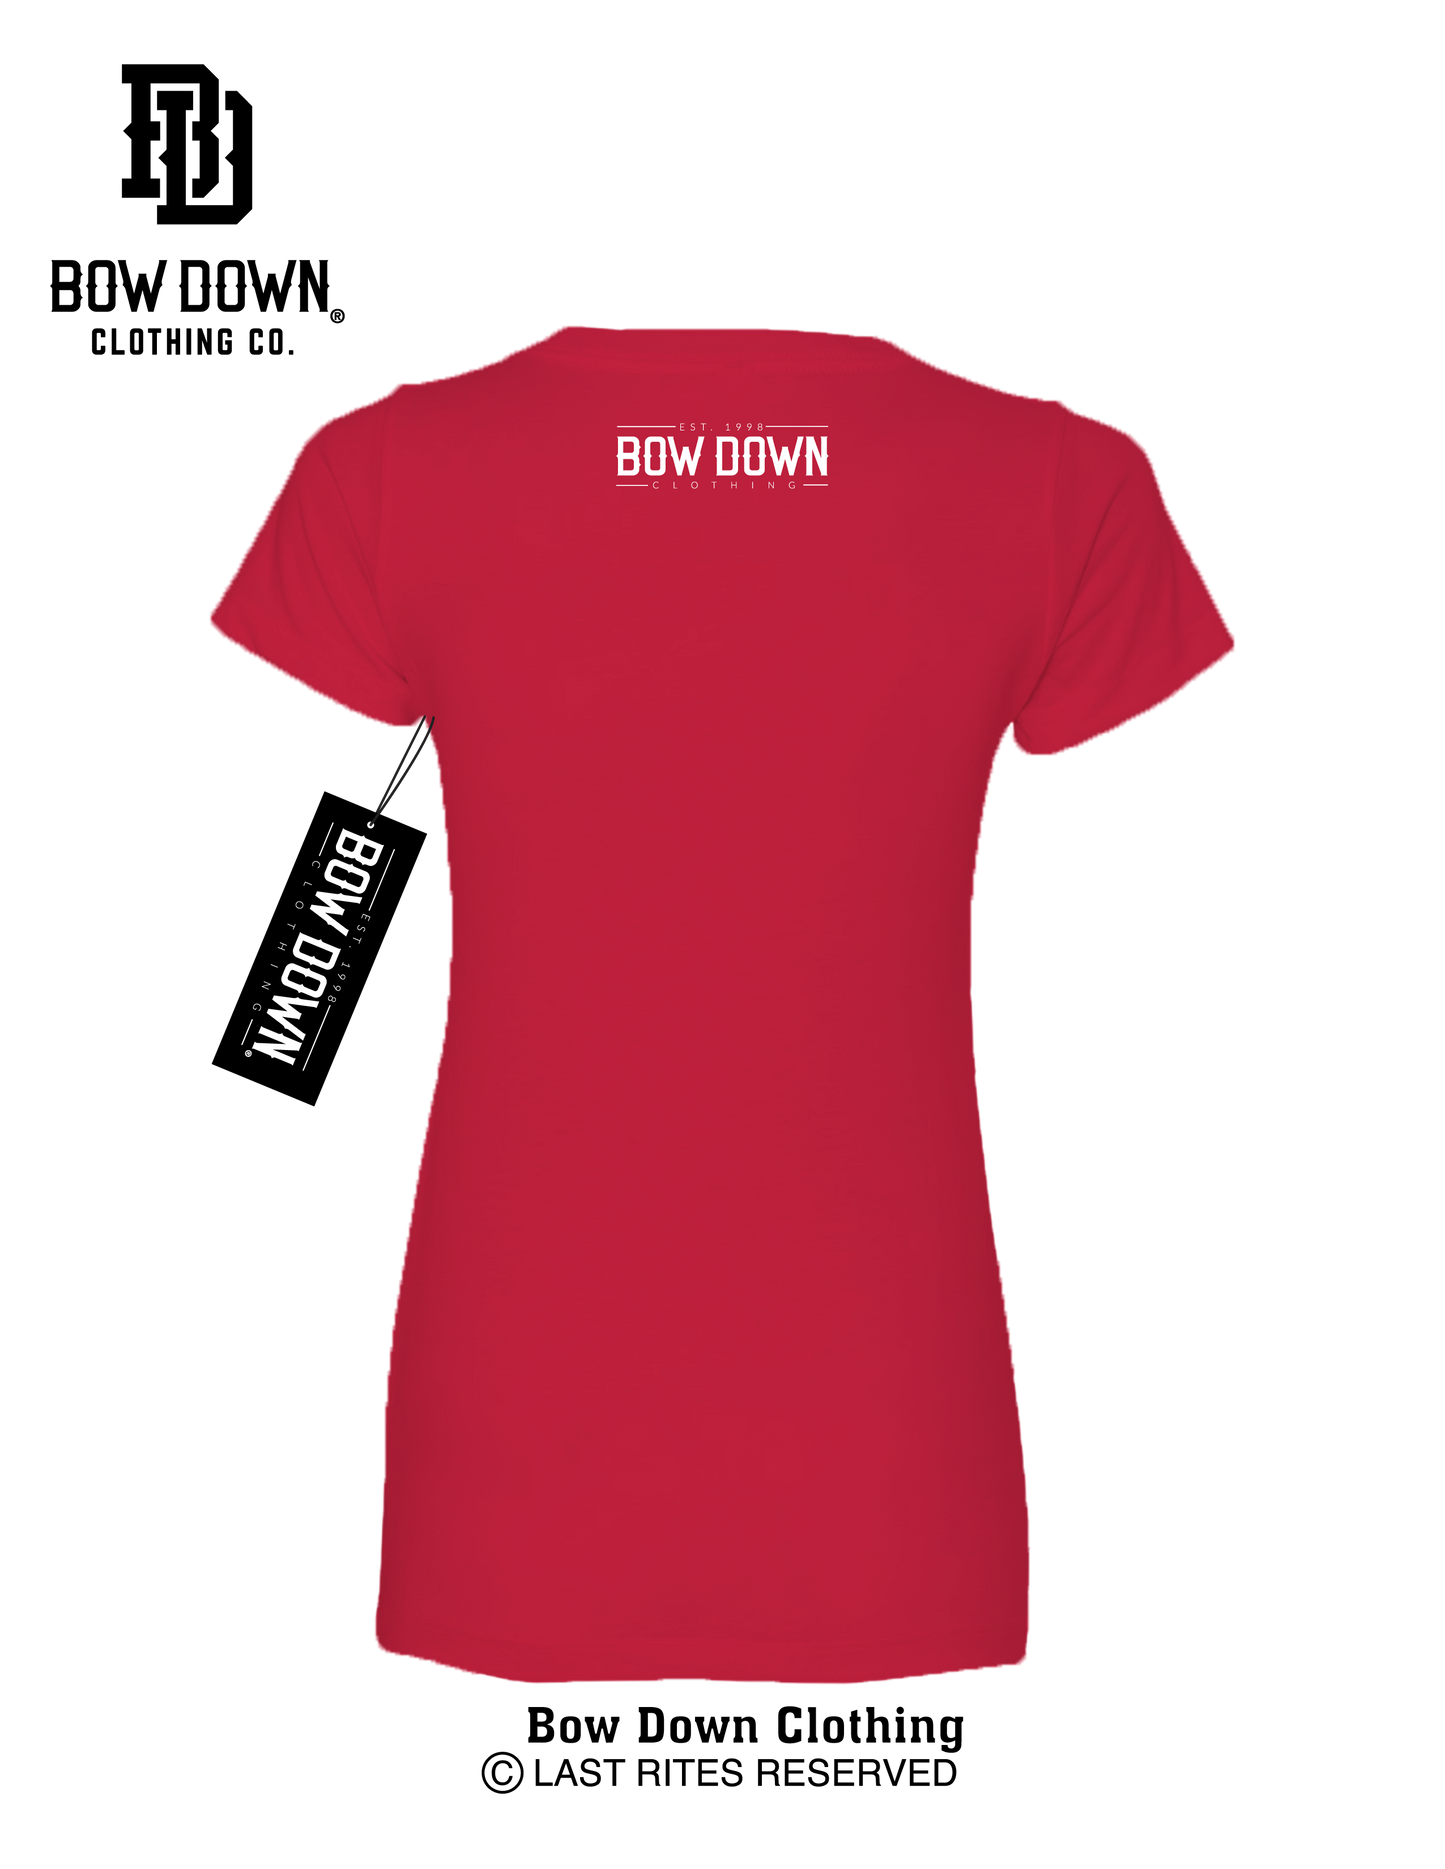 BOW DOWN CROWN 2 WOMEN'S V-NECK